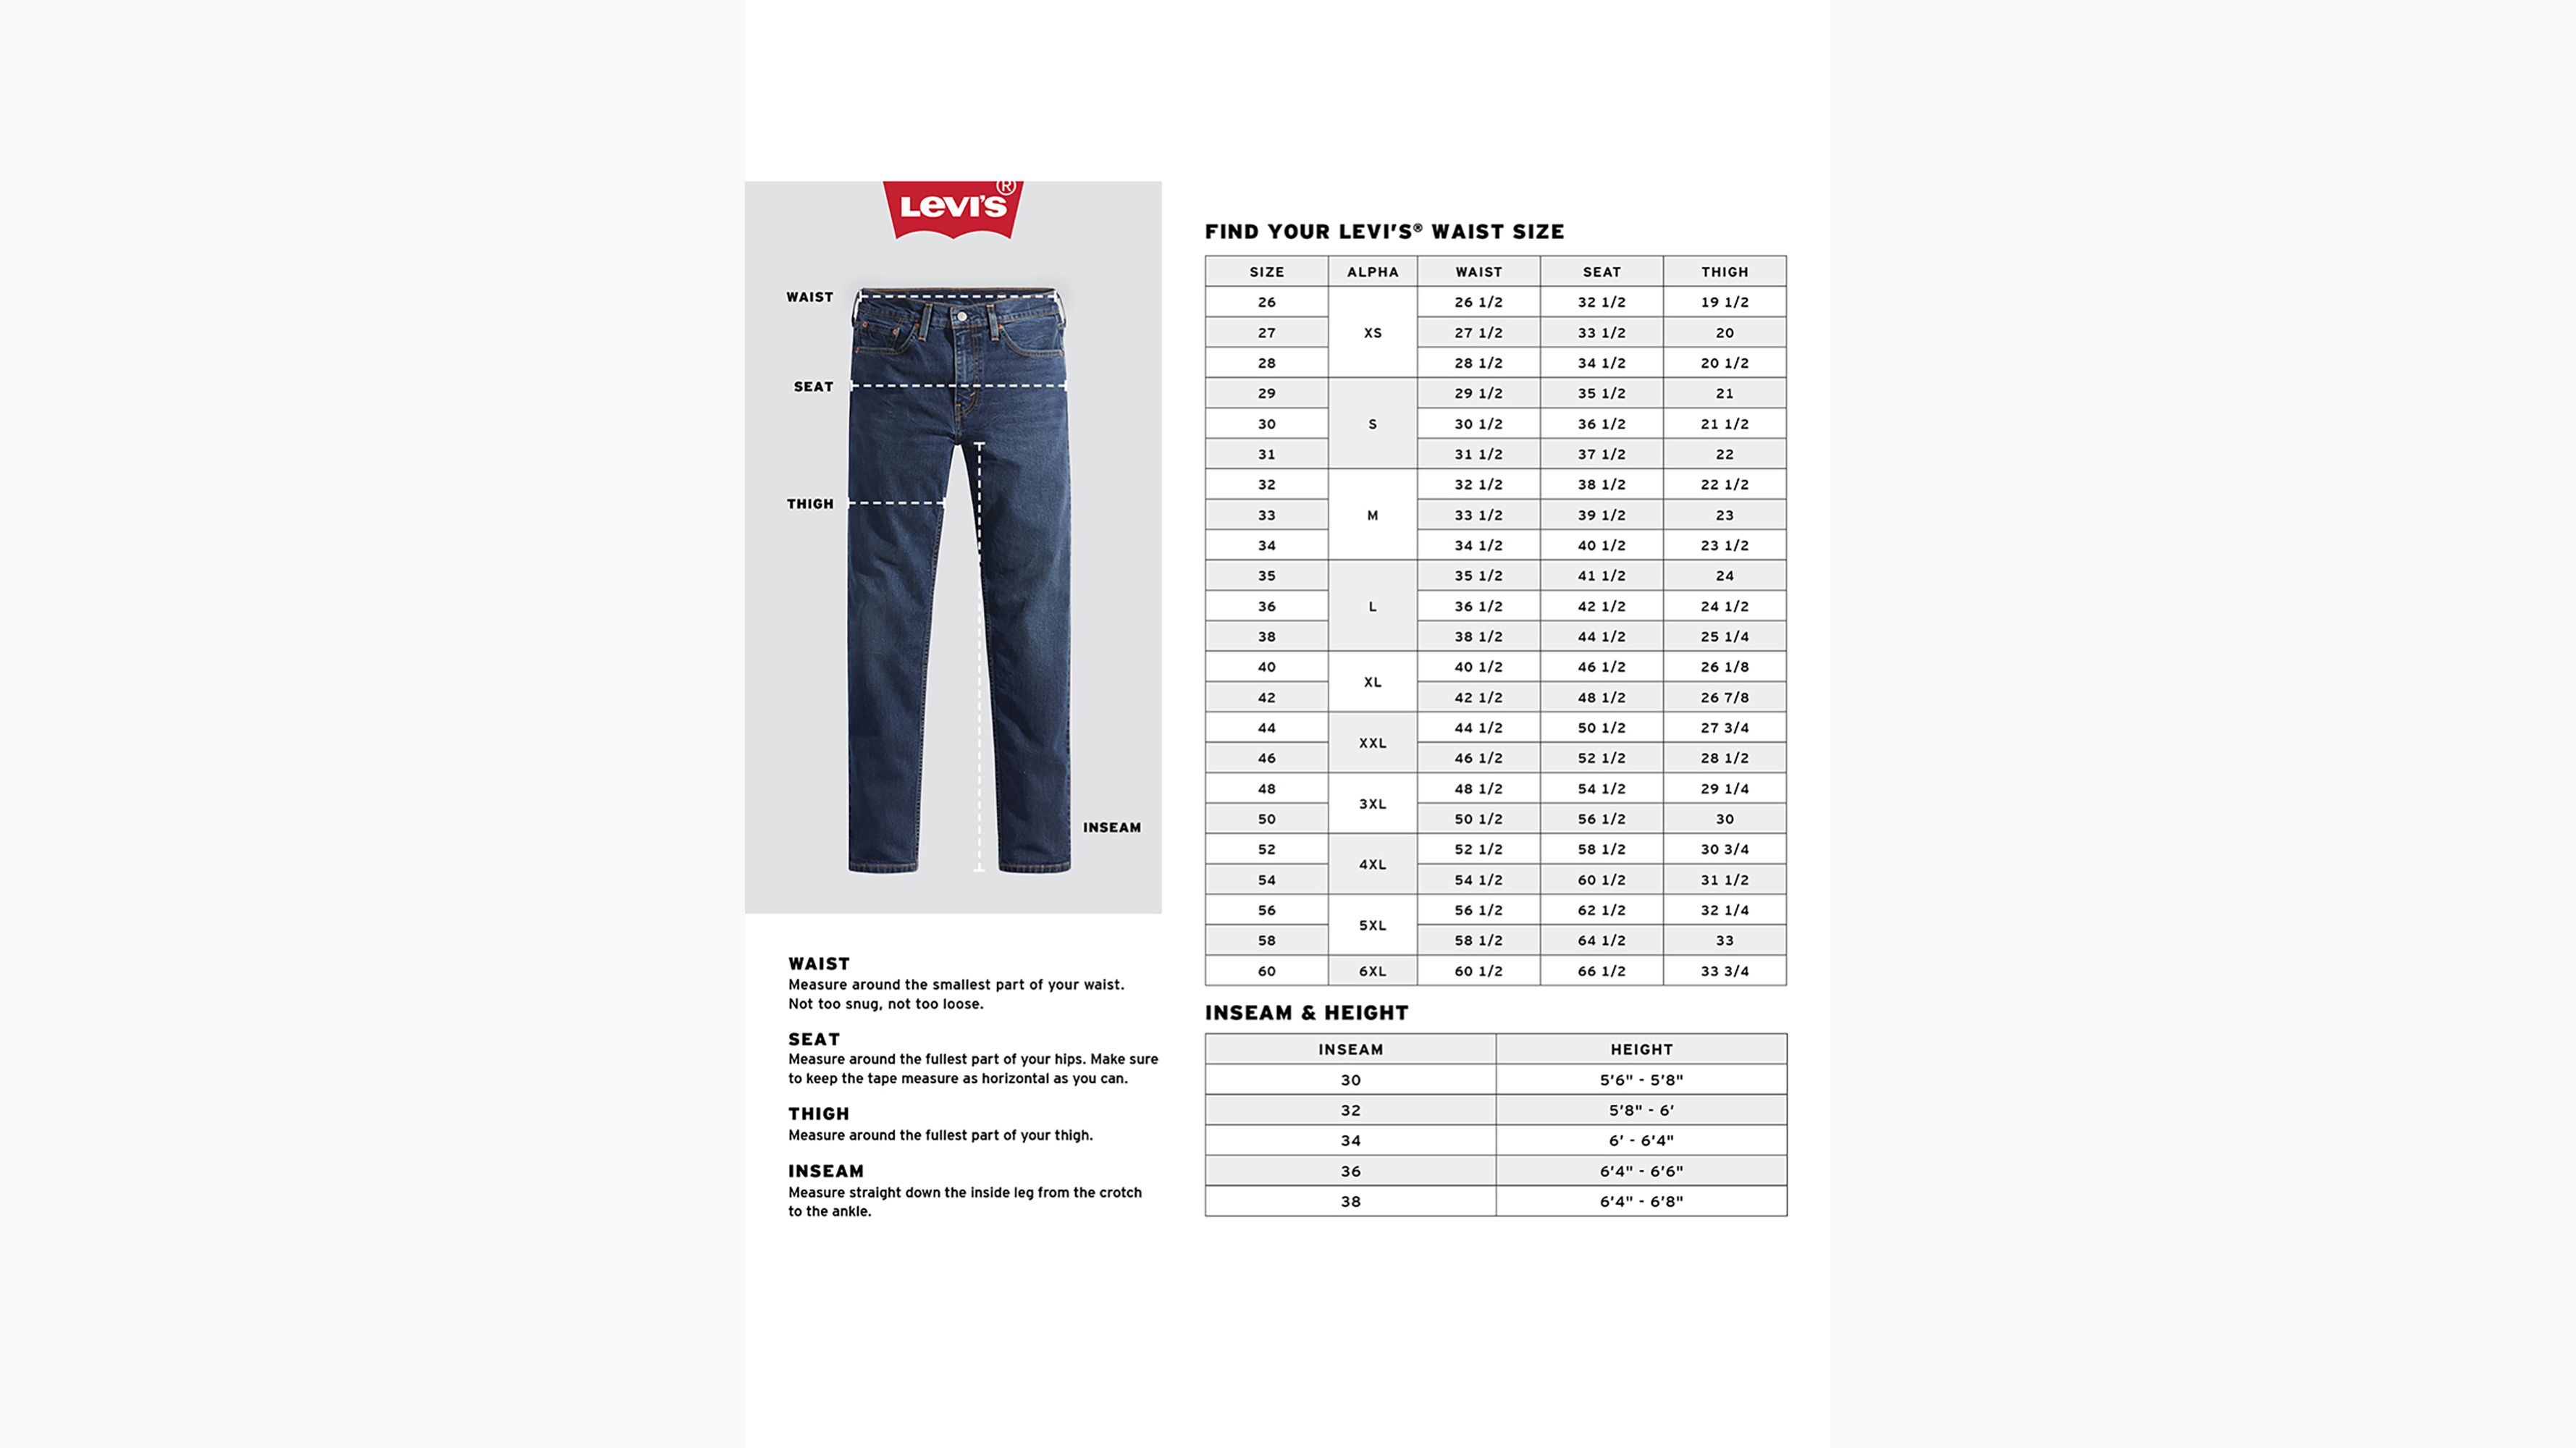 Levi's Fit Guide: How to Measure Jeans